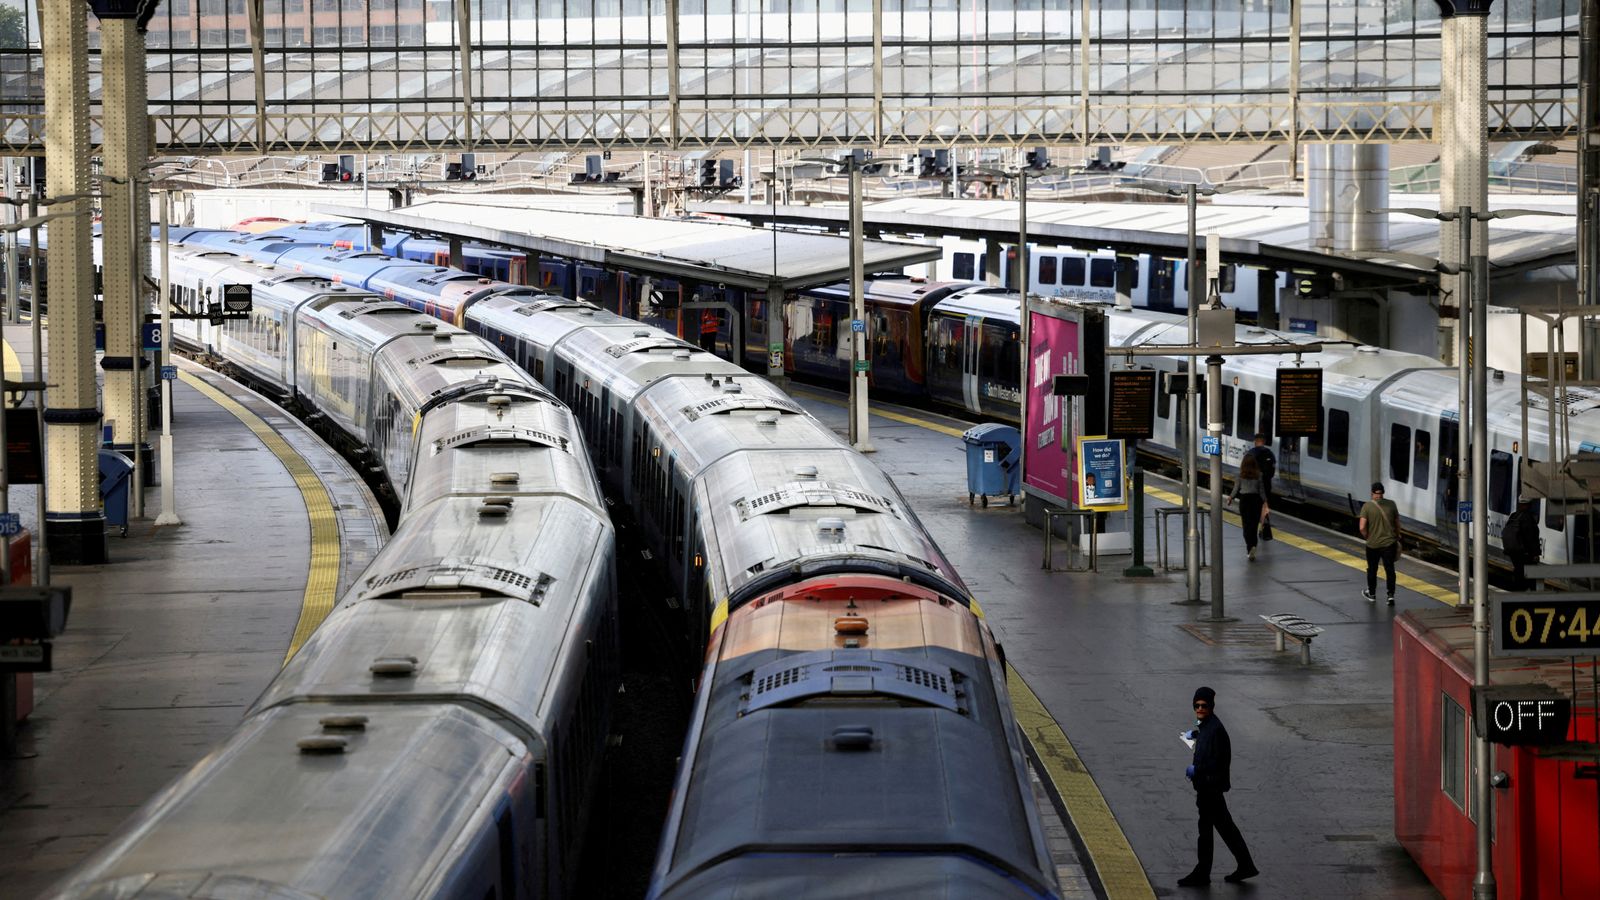 Series of rail strikes planned to start today suspended, RMT union says - but it's too late to reinstate all services